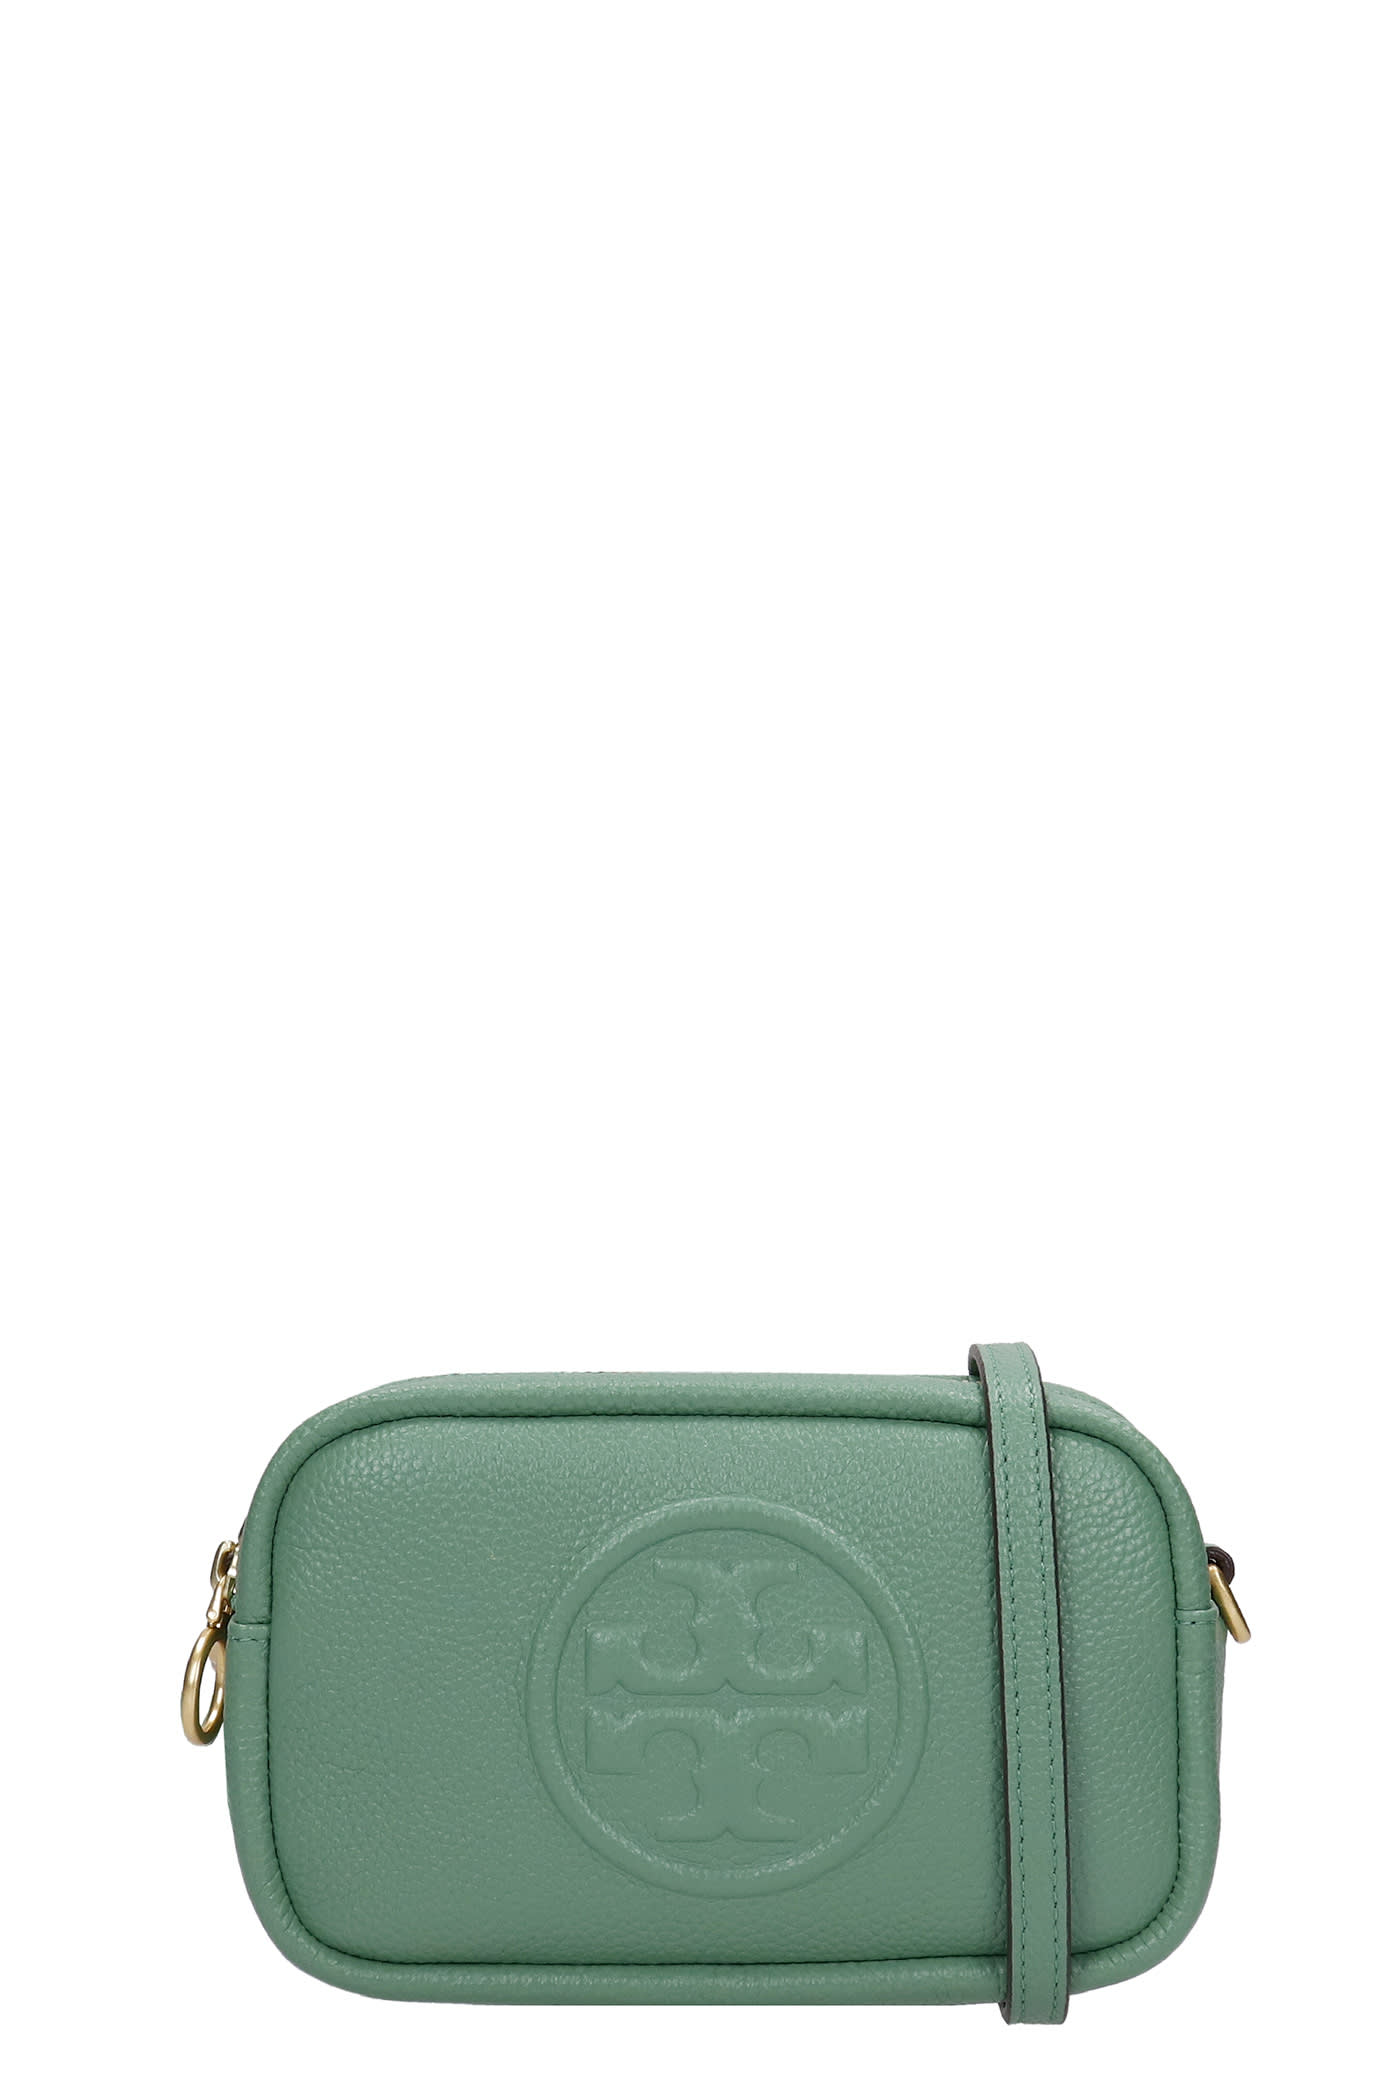 Tory Burch Perry Bombe Clutch In Green Leather